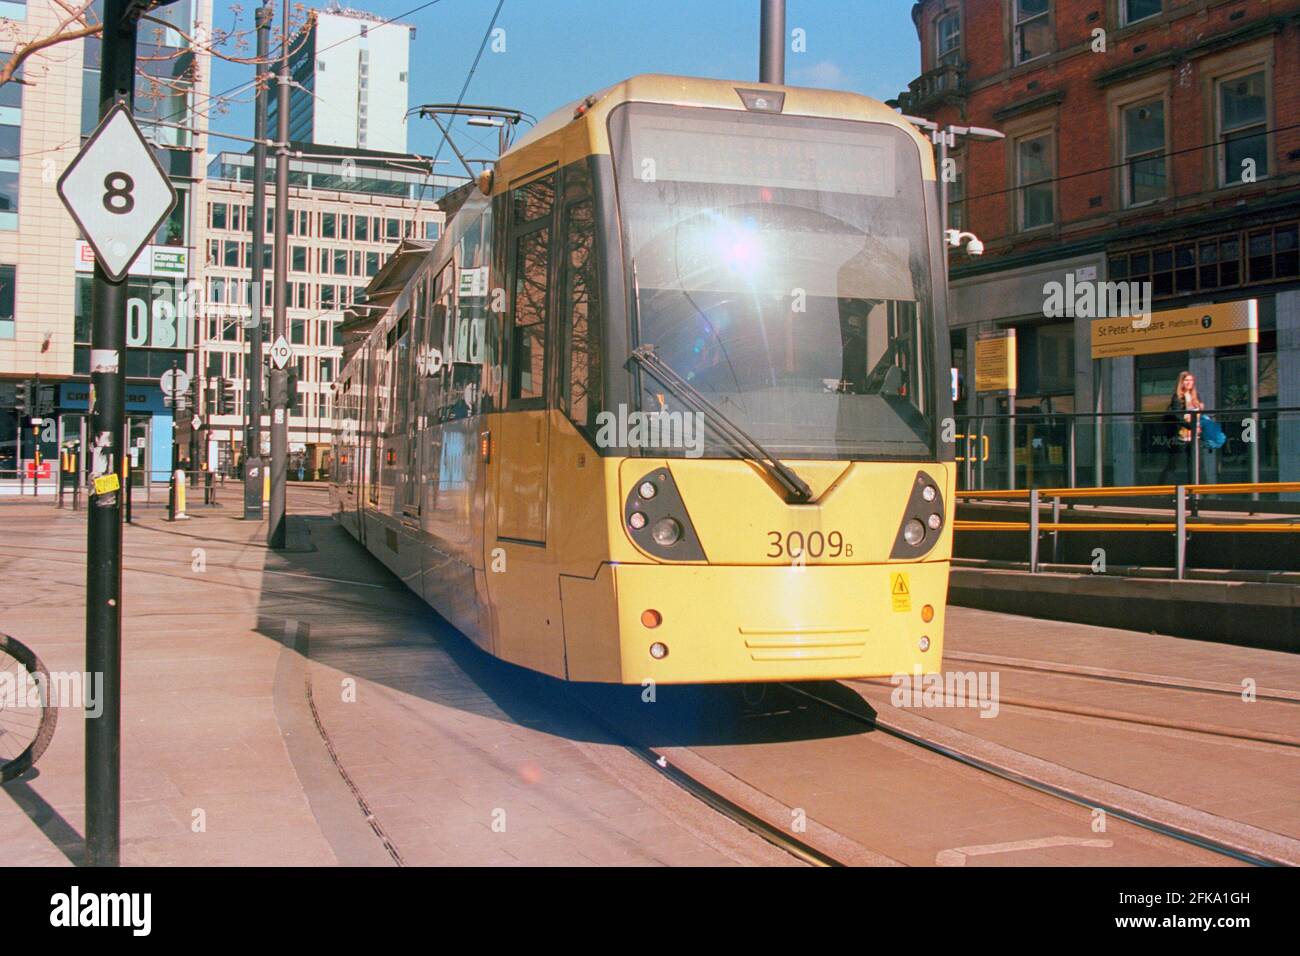 Manchester, UK - 3 April 2021: A Manchester Metrolink tram (Bombardier M5000, no. 3009) at St Peter's Square. Stock Photo